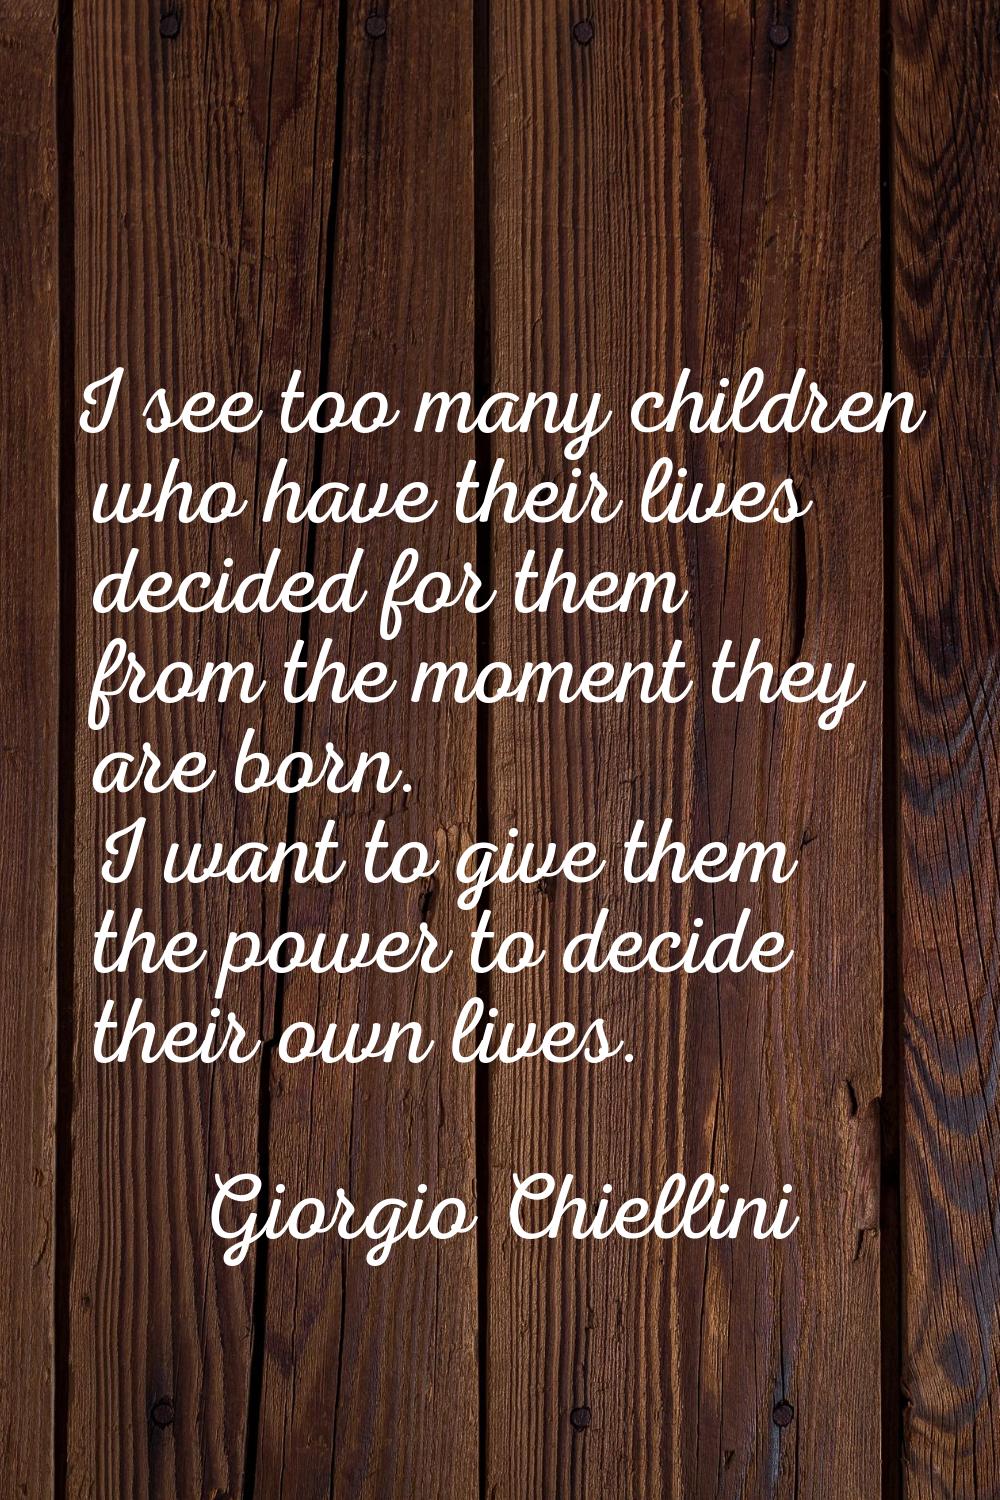 I see too many children who have their lives decided for them from the moment they are born. I want